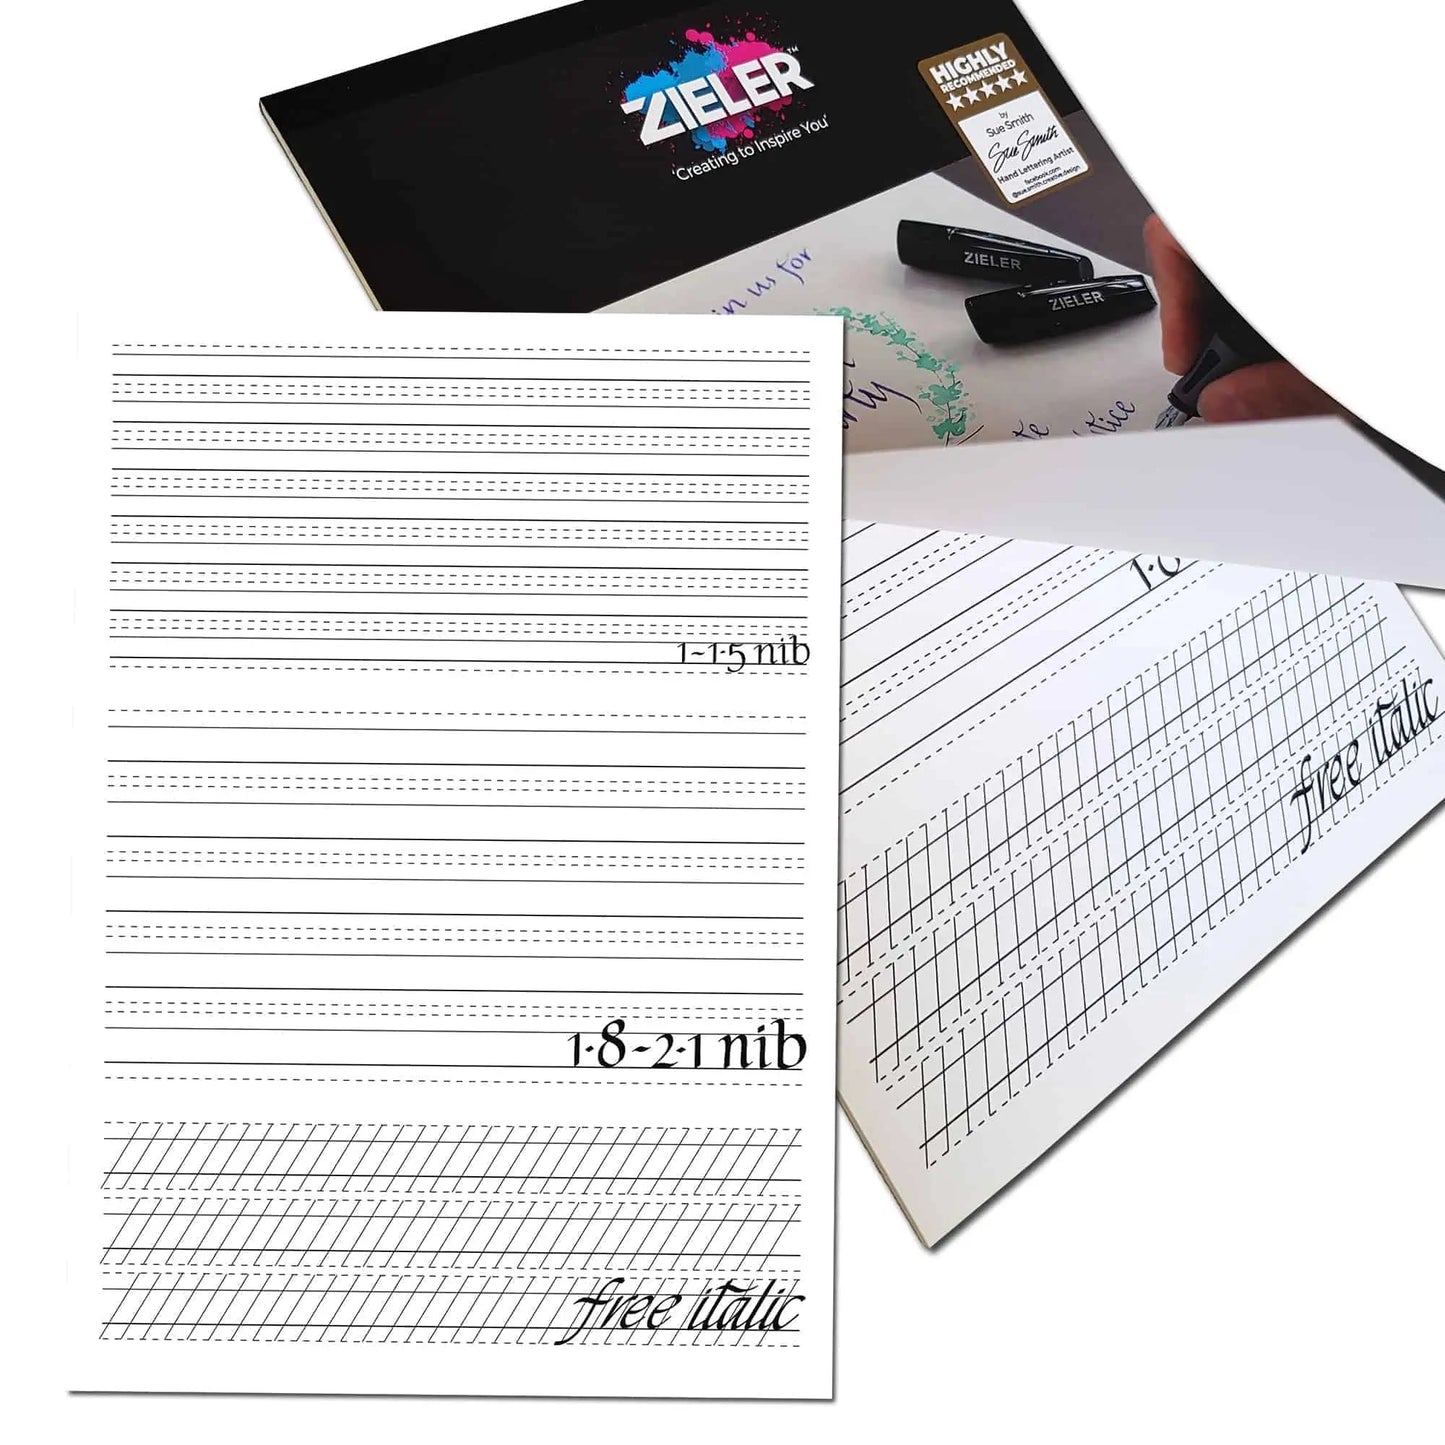 Zieler A4 Calligraphy Paper – 90gsm 30 Sheets